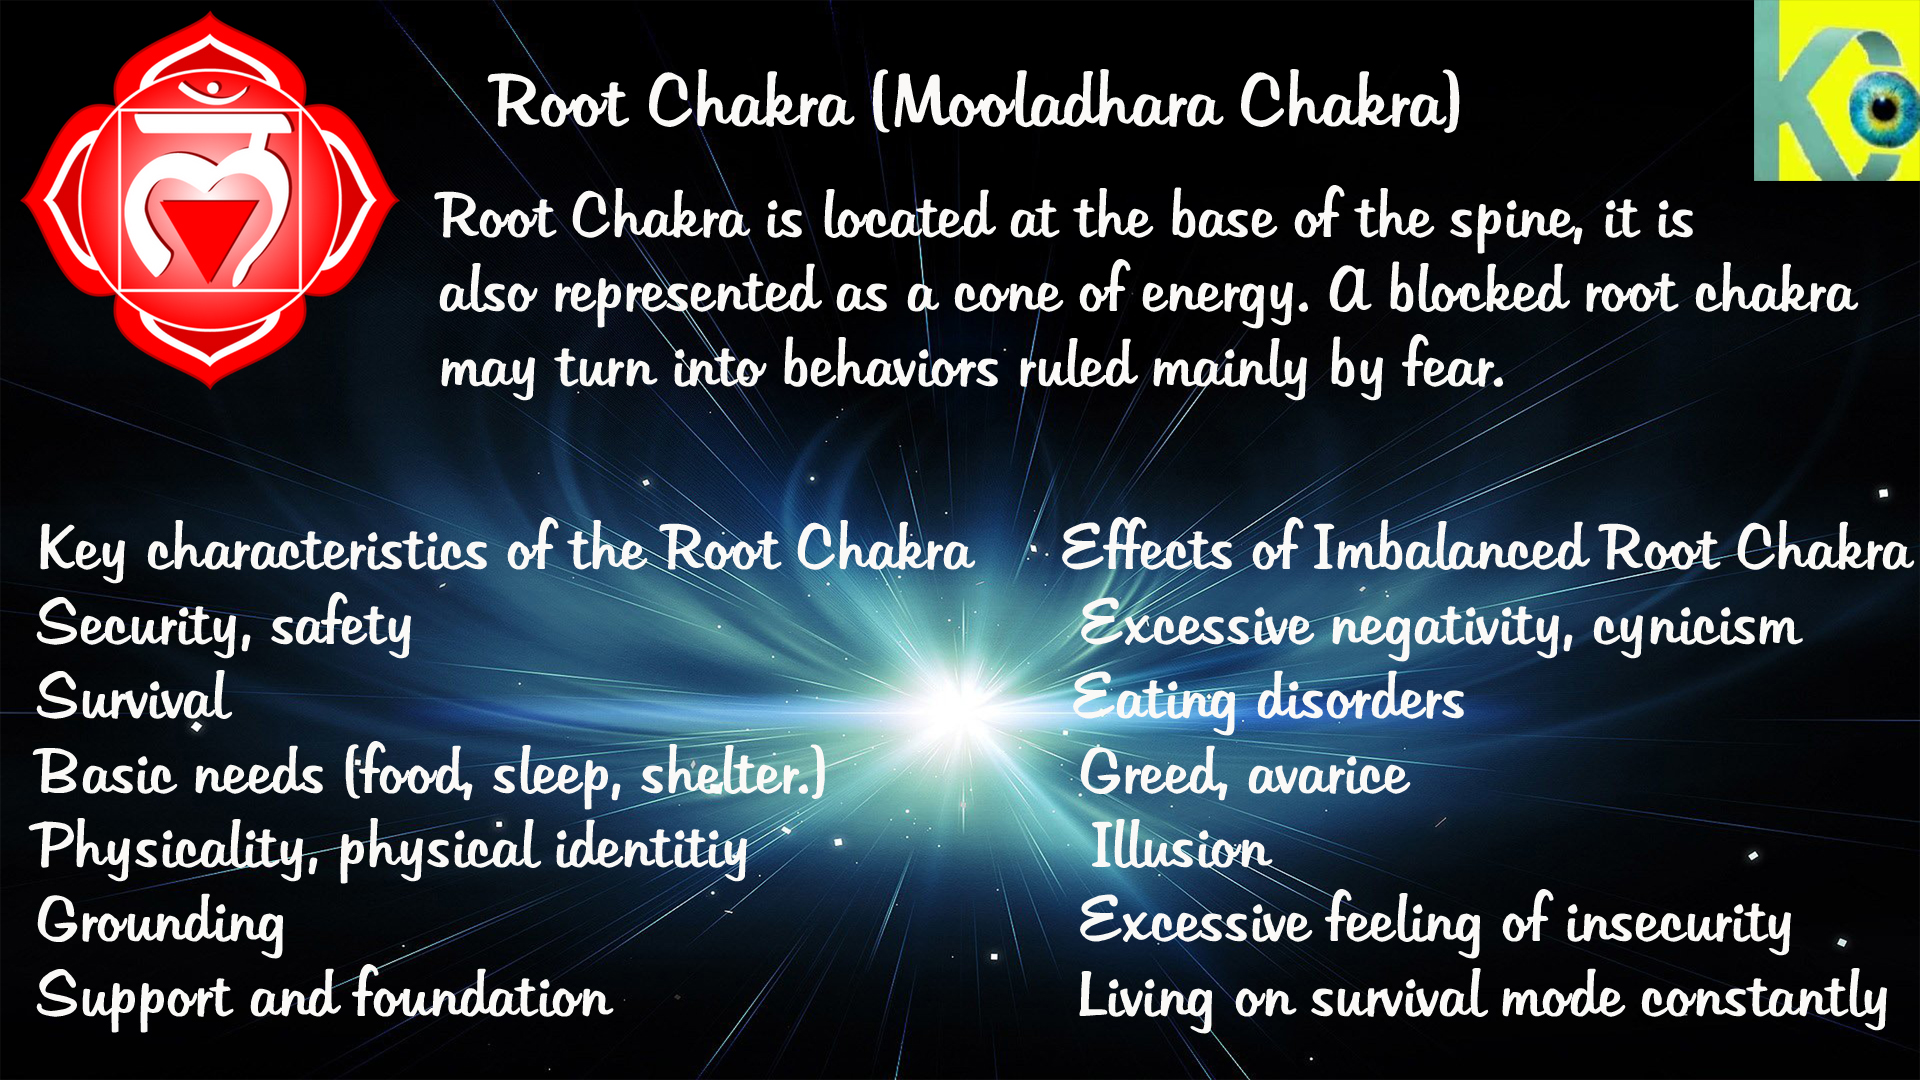 Root Chakra Charactrestcis and Effects